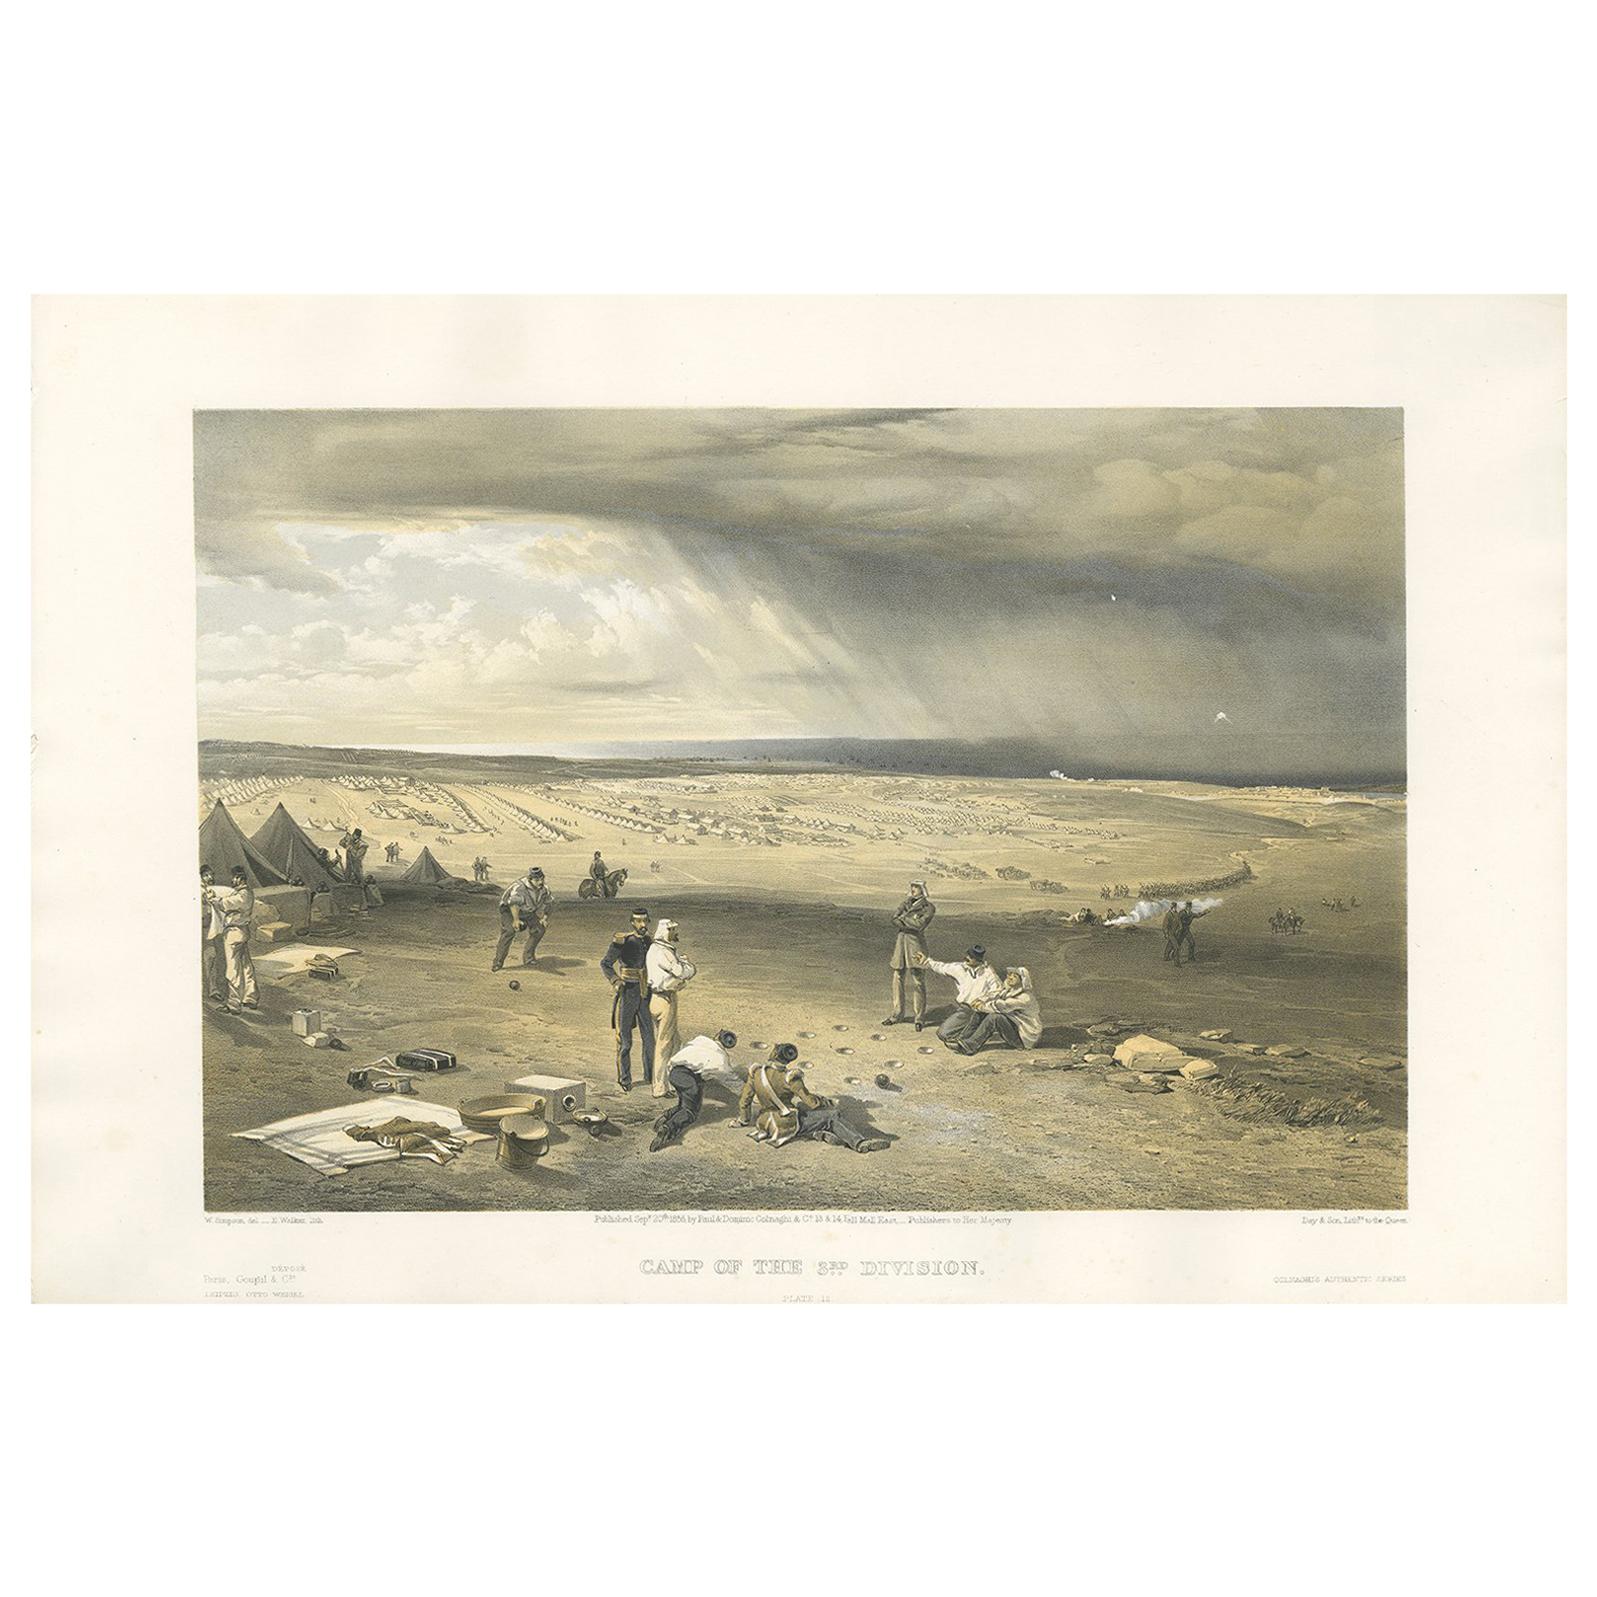 Antique Print of the Camp of the 3rd Division 'Crimean War' by W. Simpson, 1855